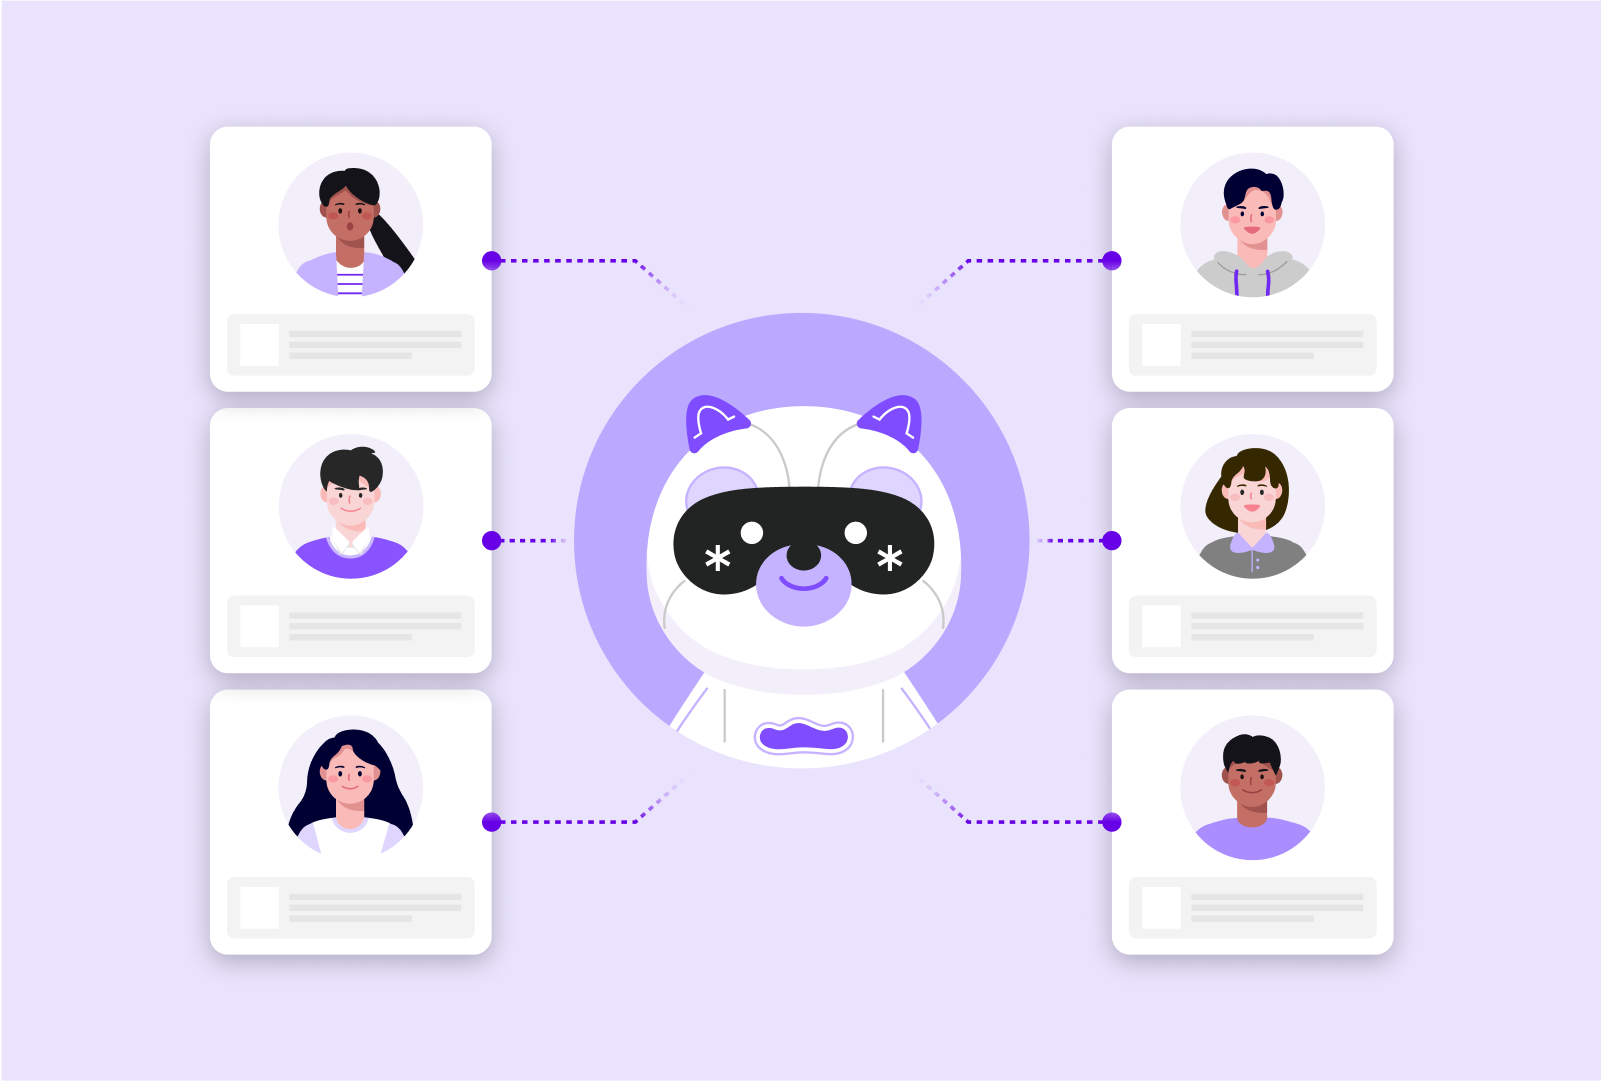 Chatbots with adaptive personalities for different situations